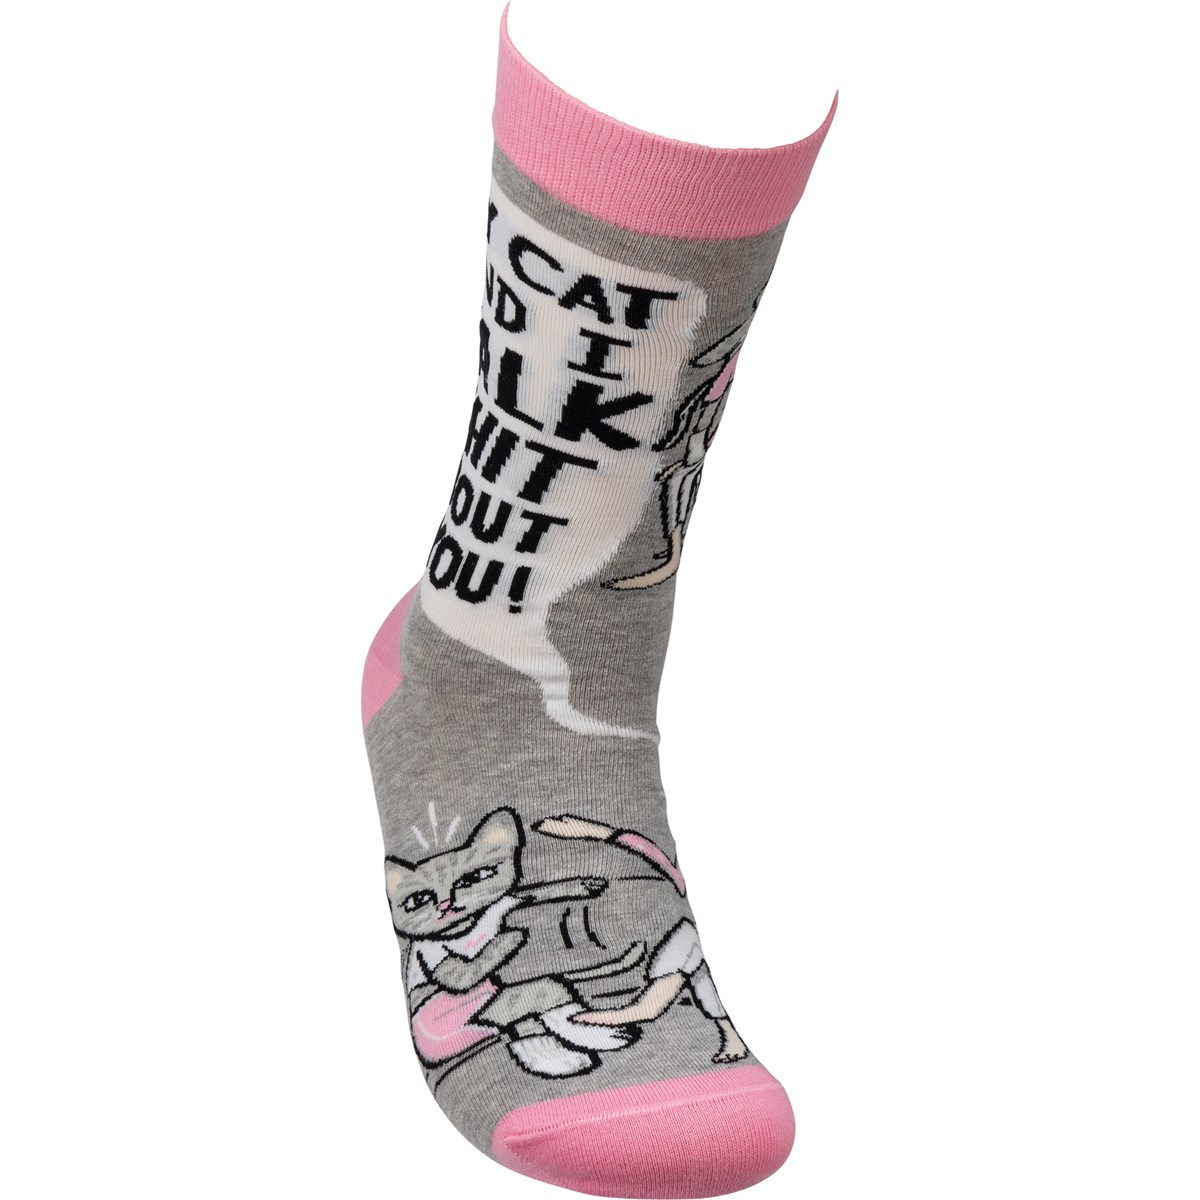 My Cat And I Talk About You Socks - Cotton, Nylon, Spandex